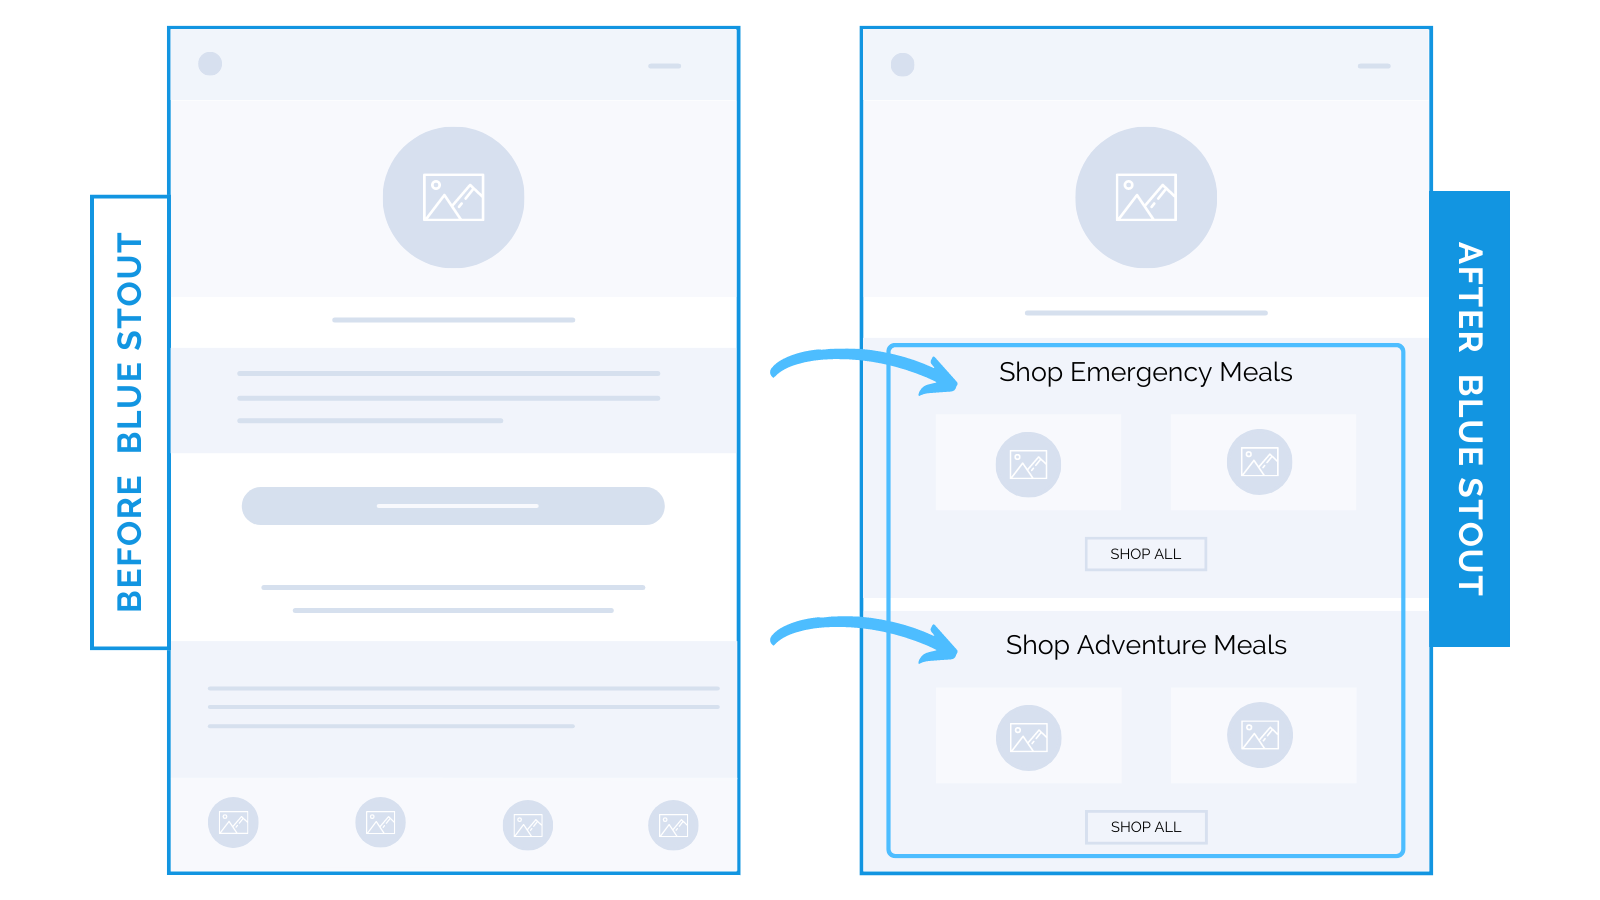 Conversion boost with major categories added to mobile homepage